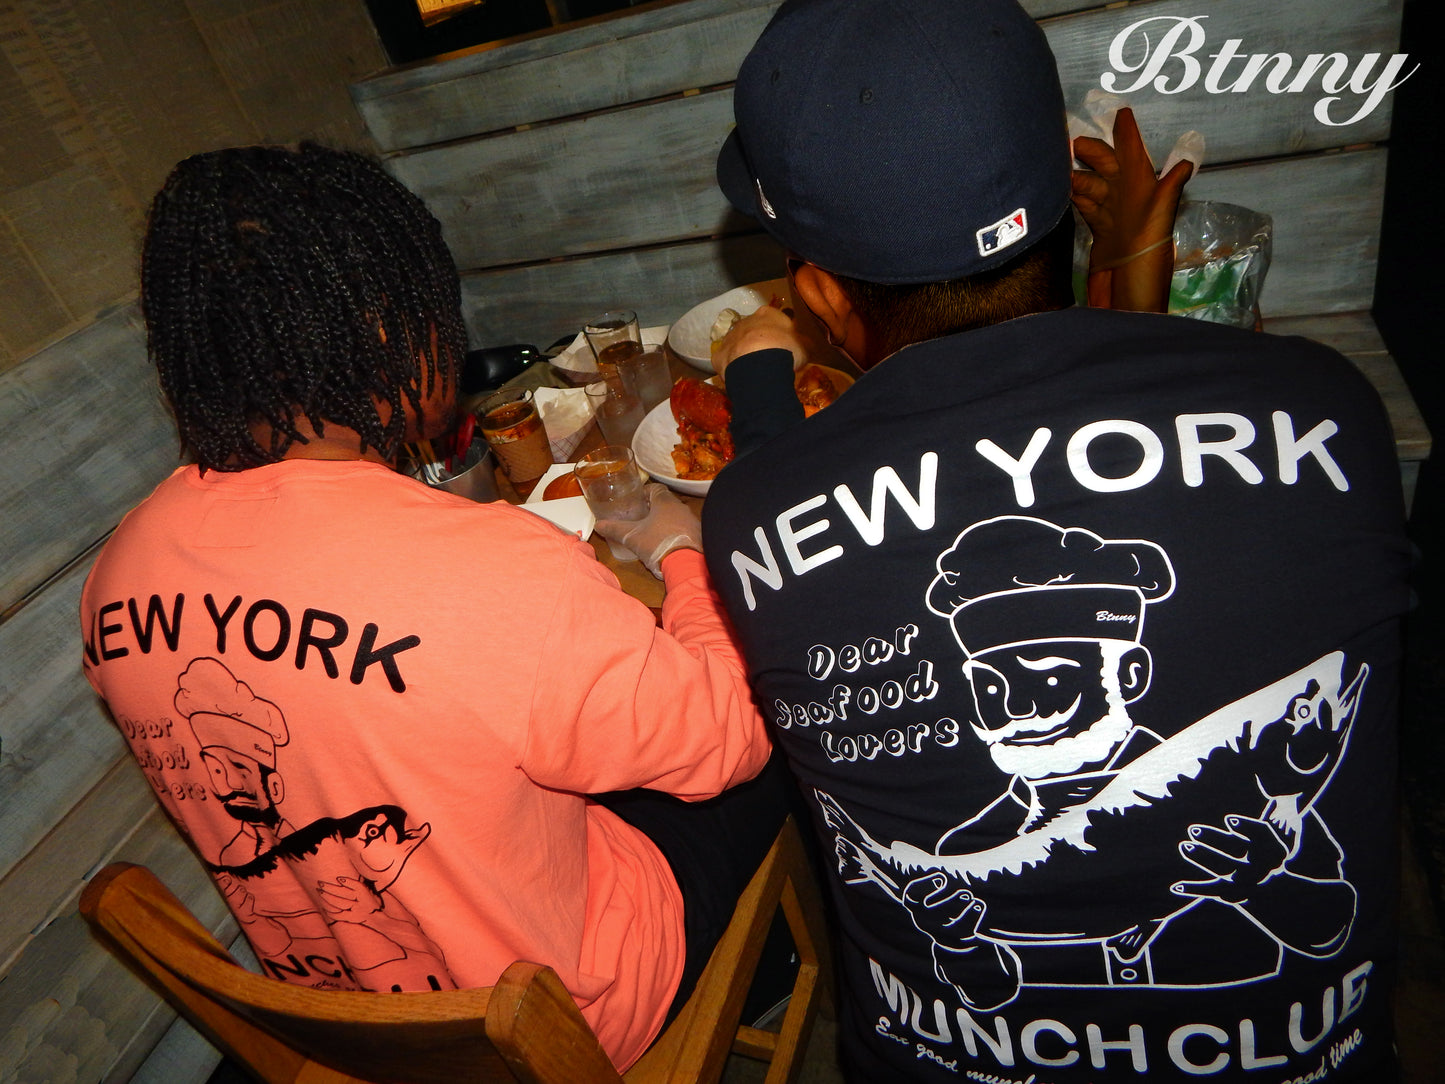 NY MUNCH CLUB(SEAFOOD LOVER) L/S T-Shirts